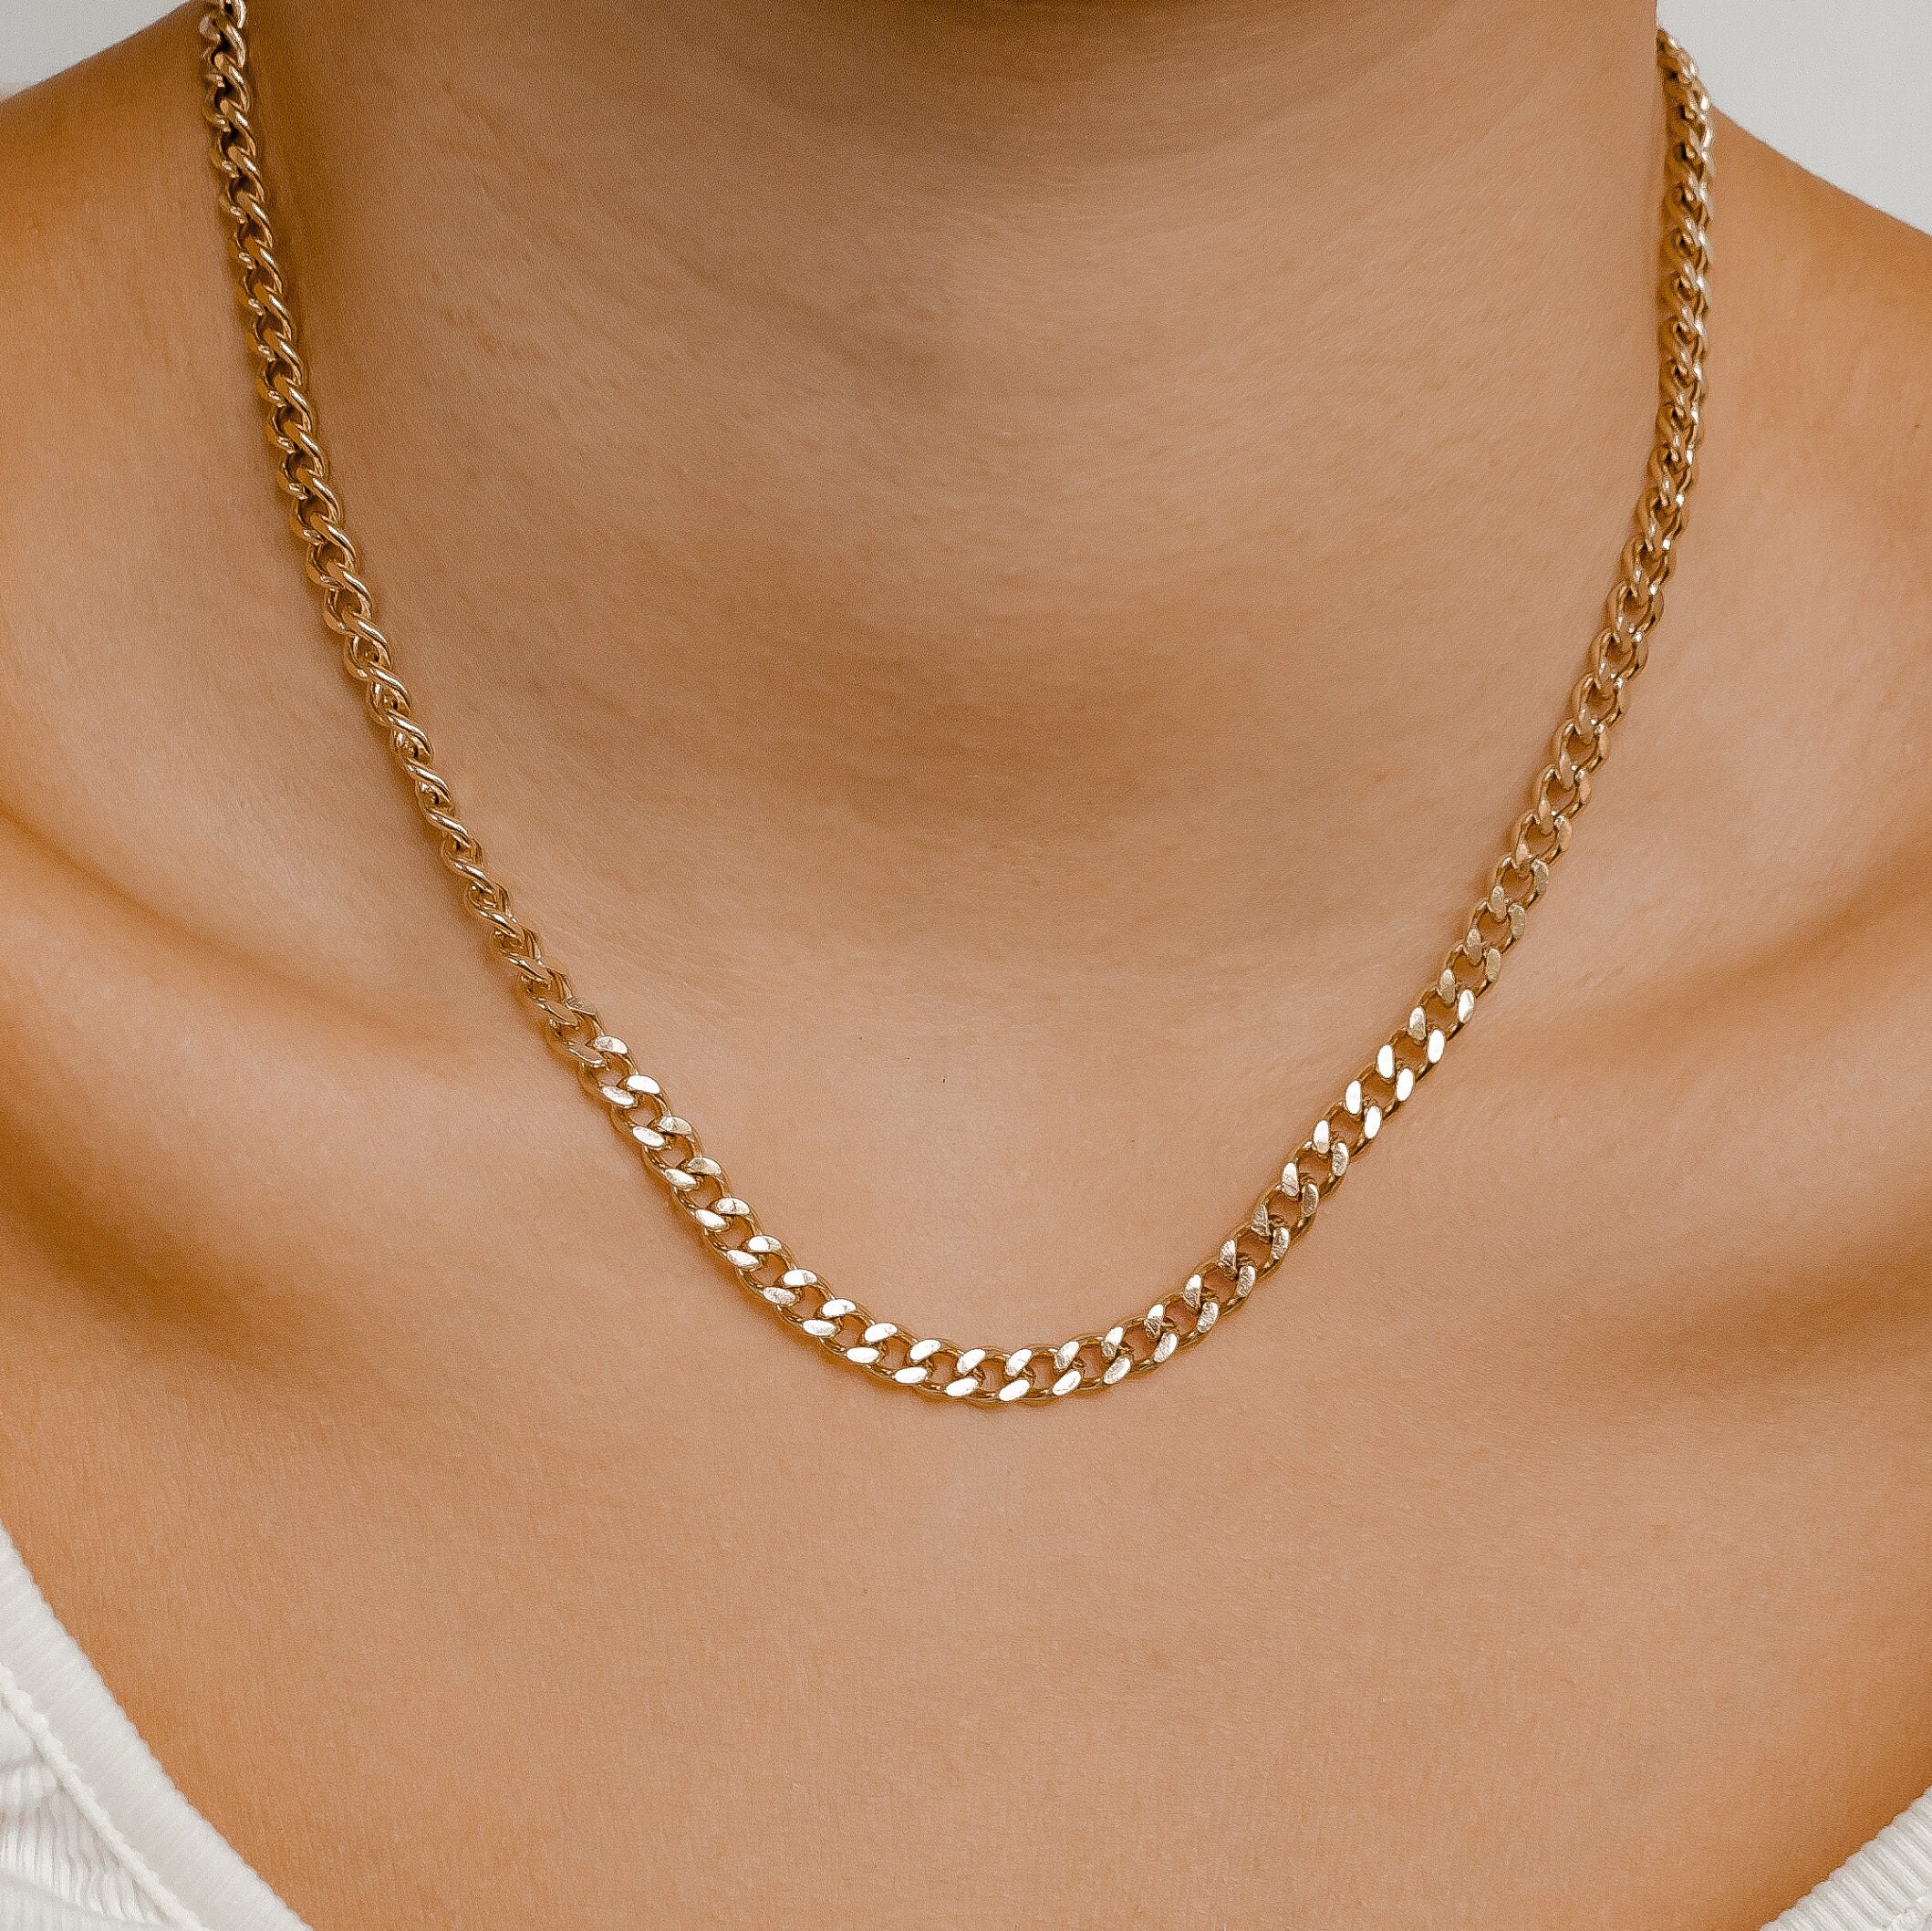 Best Travel Necklace Jewelry Gift | Best Gold Chunky Chain Necklace for Travel, Stylish, Tarnish-resistant, Hypoallergenic, Water-proof, 18K Gold